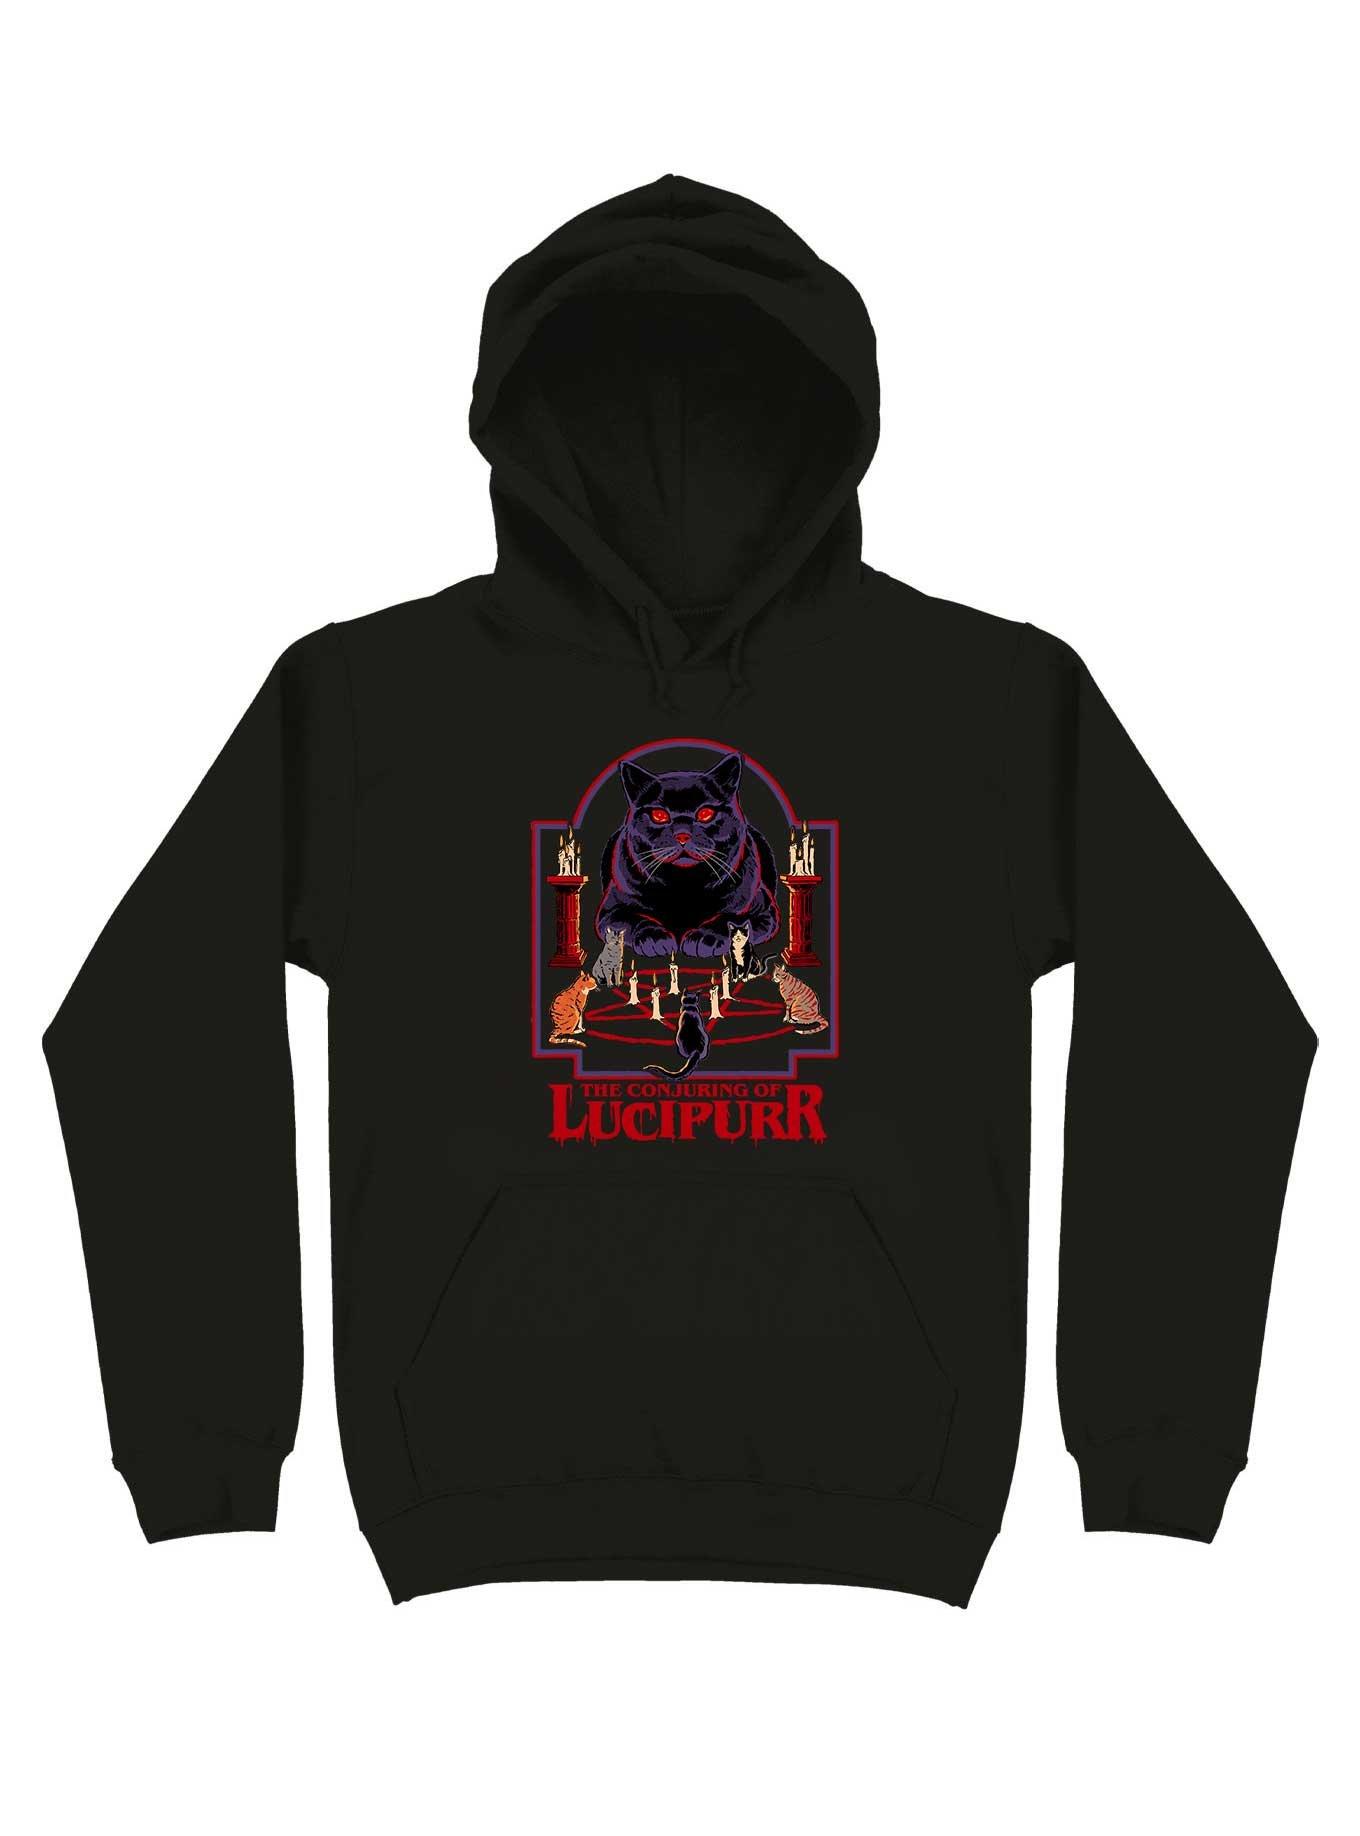 The Conjuring of Lucipurr Hoodie By Steven Rhodes, BLACK, hi-res